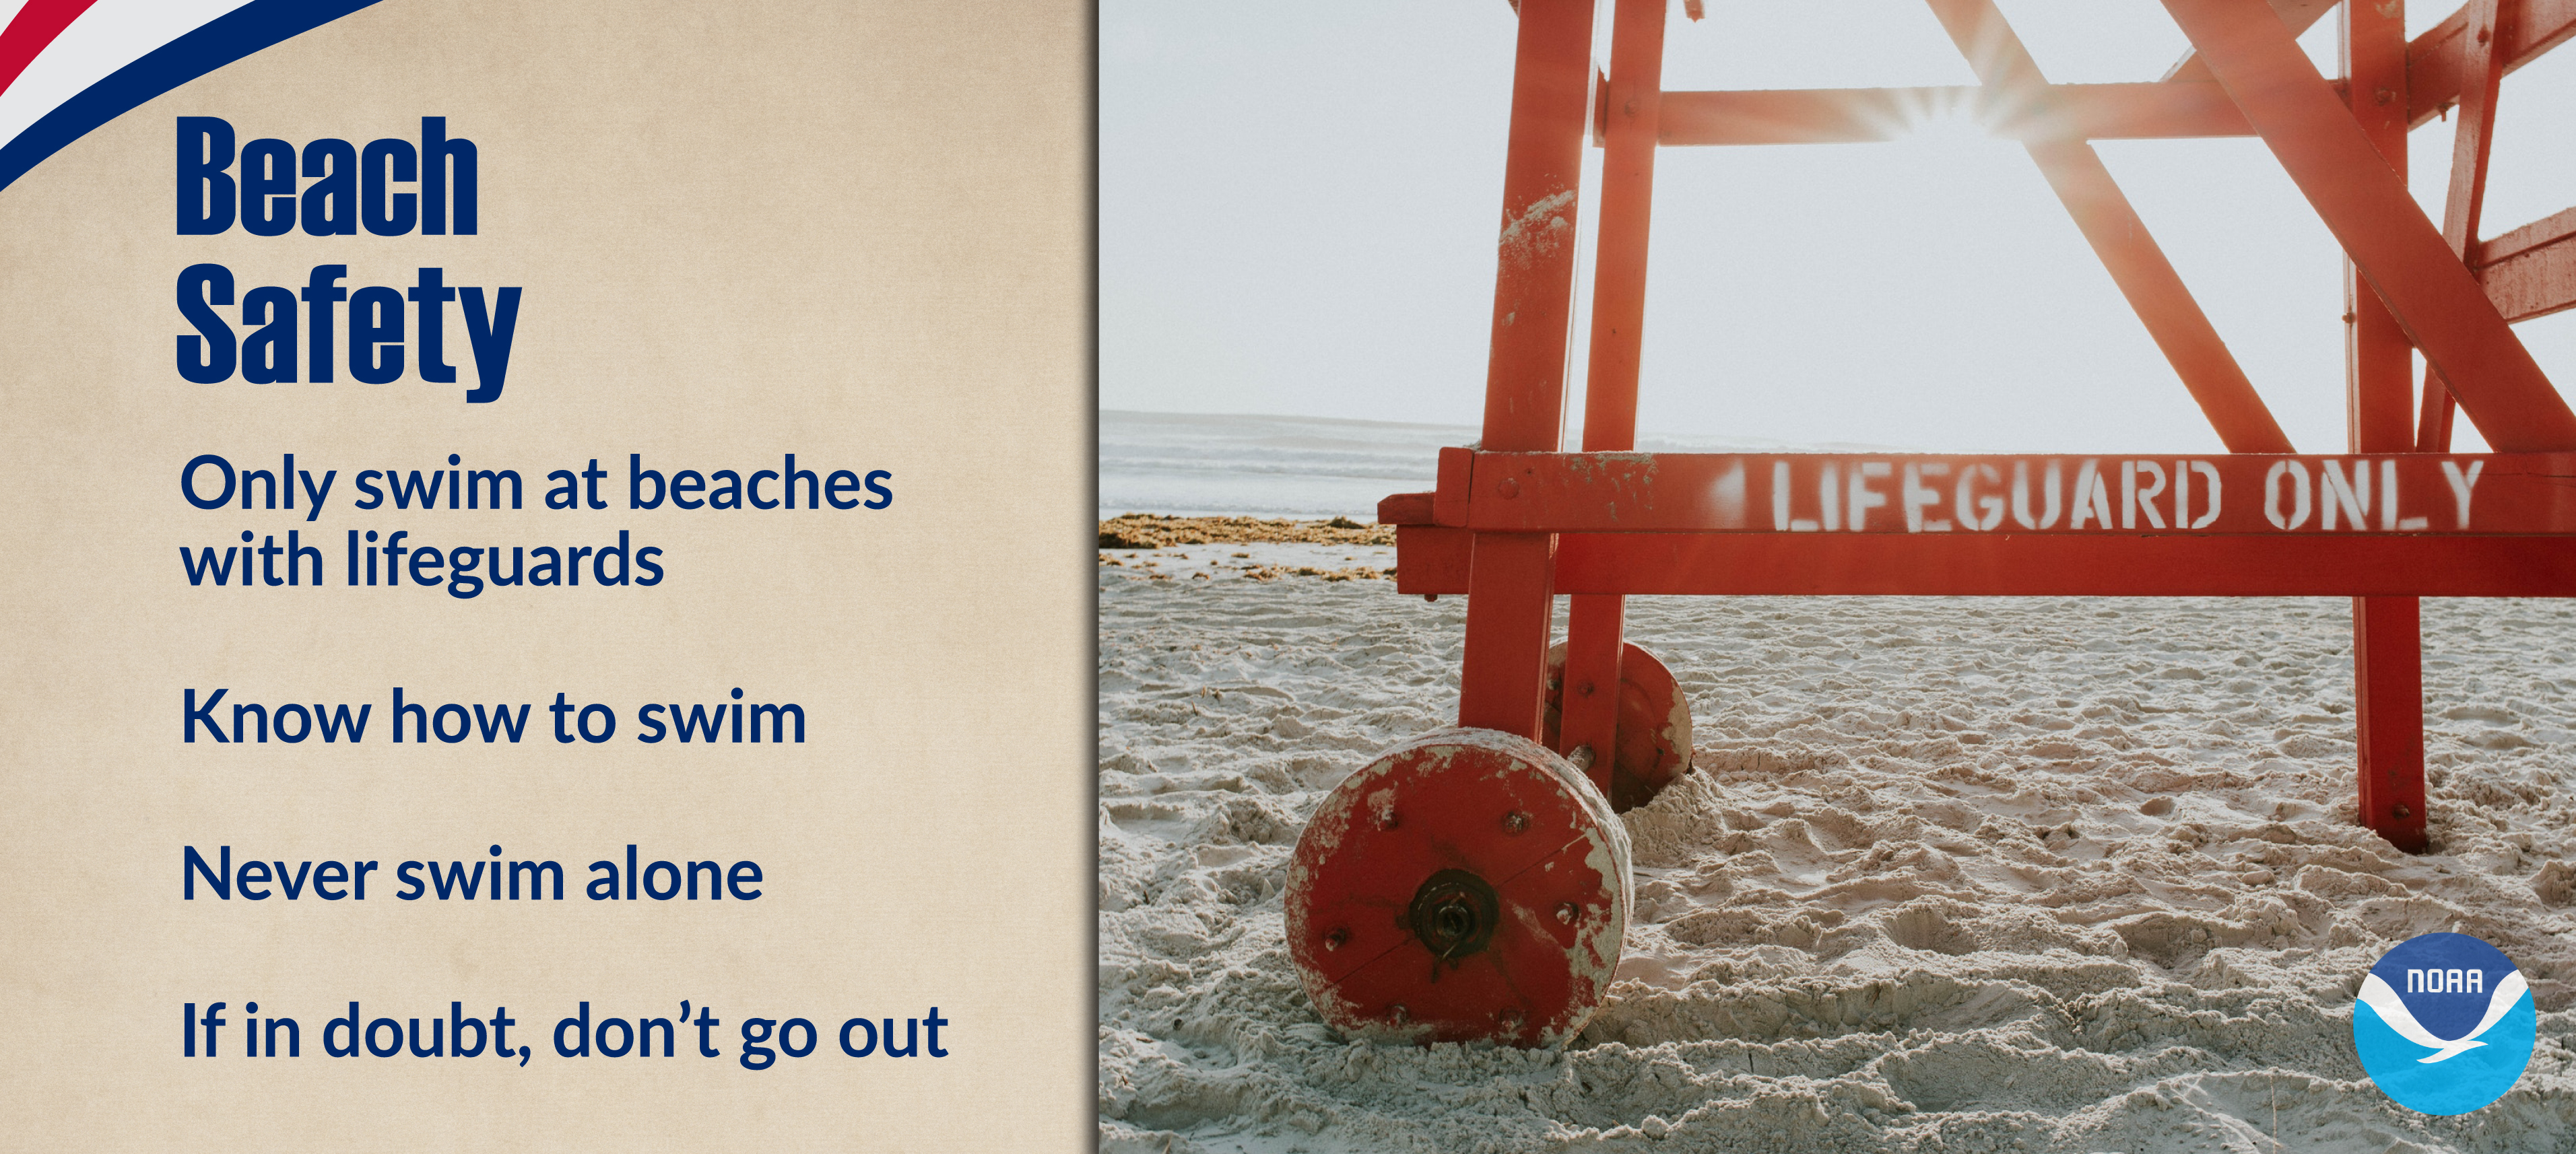 Beach safety tips are provided alongside a visual of the sun shining through the bottom of a red lifeguard stand at a sandy beach. Beach Safety Tips: Only swim at beaches with lifeguards. Know how to swim. Never swim alone. And most importantly, if in doubt, don't go out!